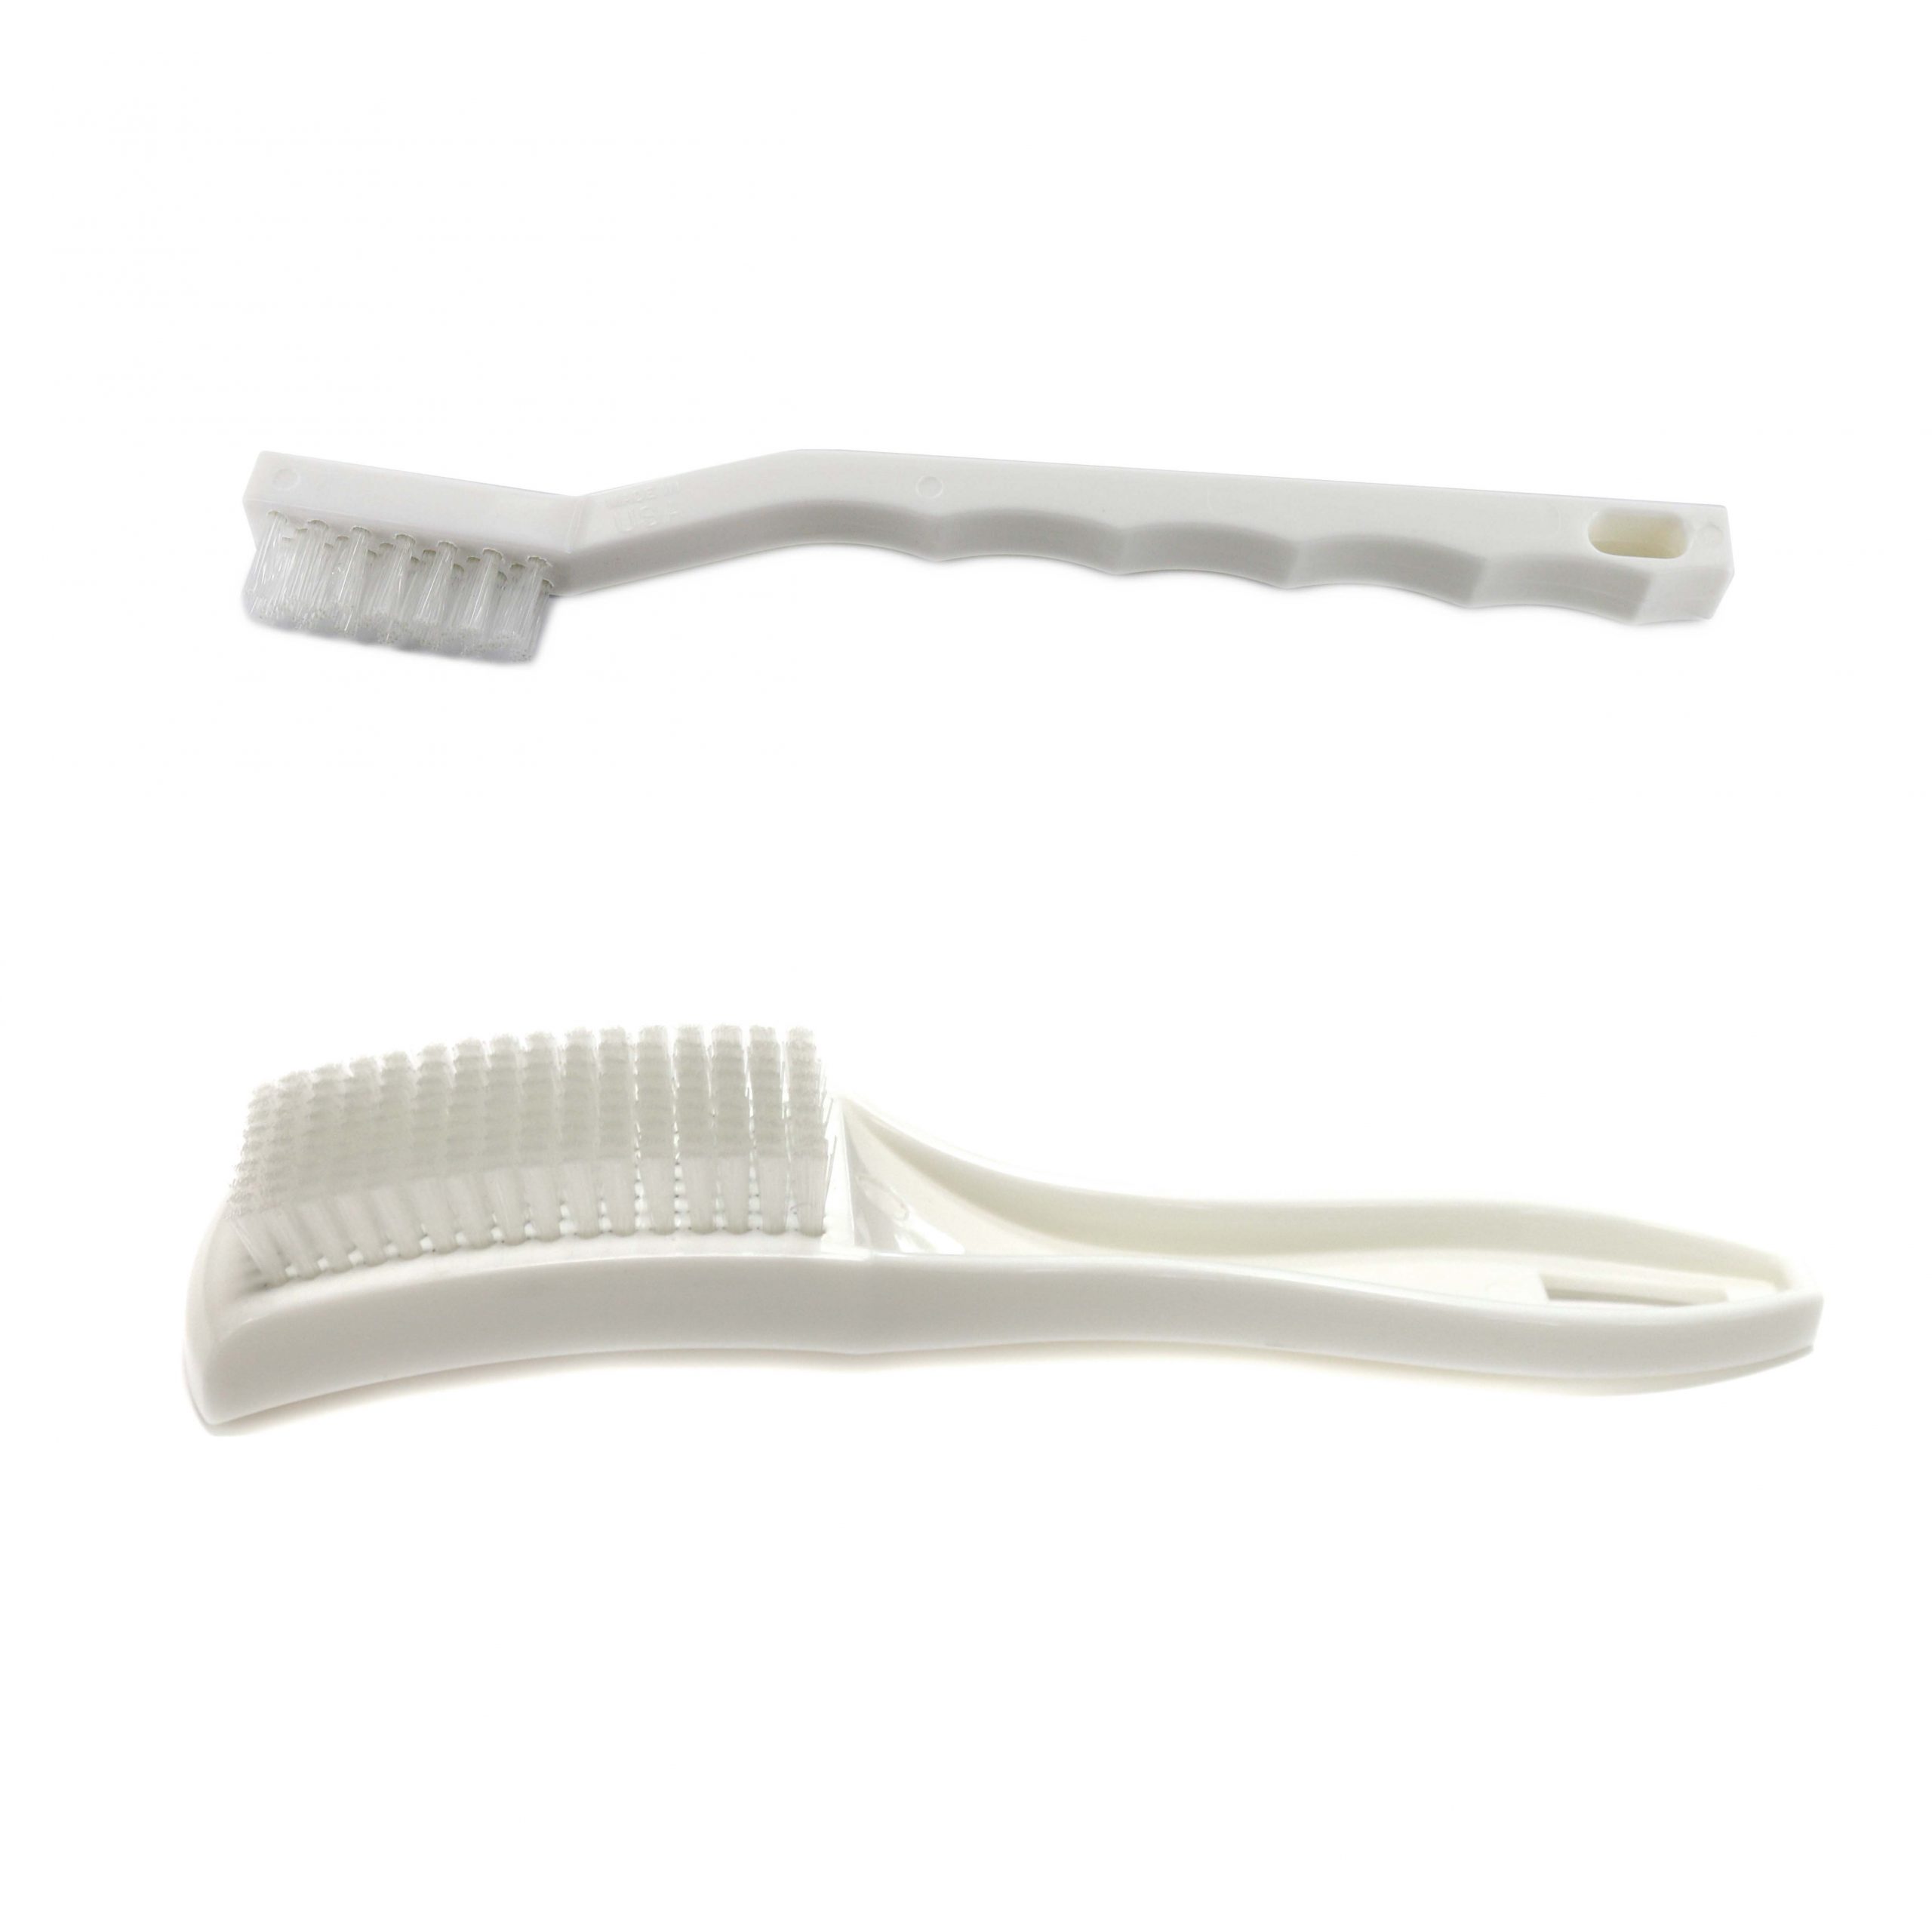 Instrument Care - 3183-P and MR001903 Instrument Cleaning Brushes